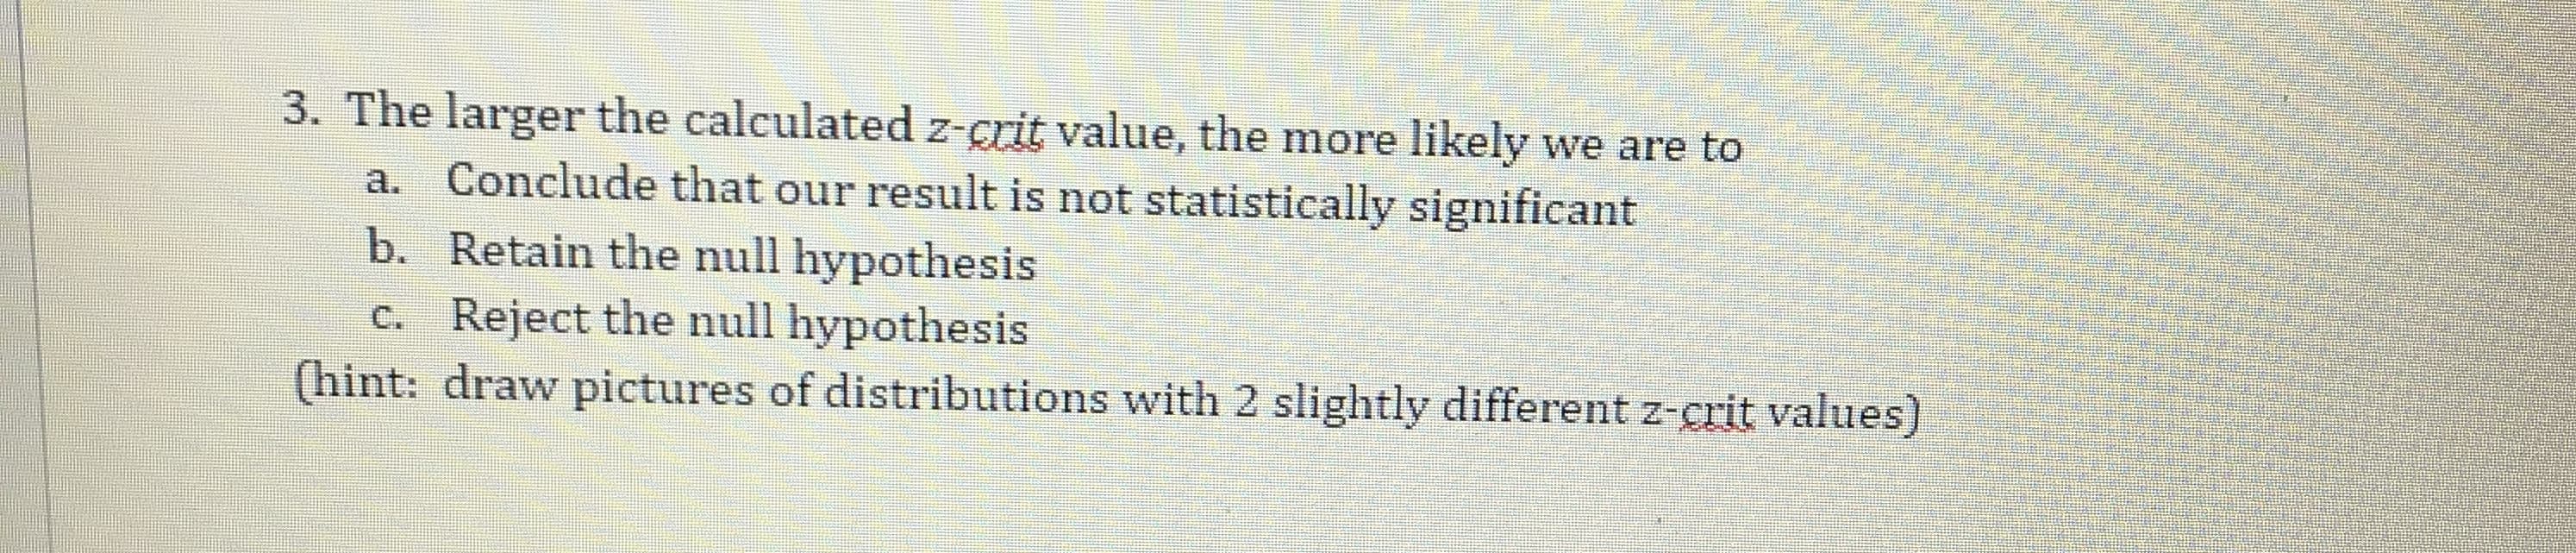 The larger the calculated z-grit value, the more likely we are to
a. Conclude that our result is not statistically significant
b. Retain the null hypothesis
e. Reject the null hypothesis
